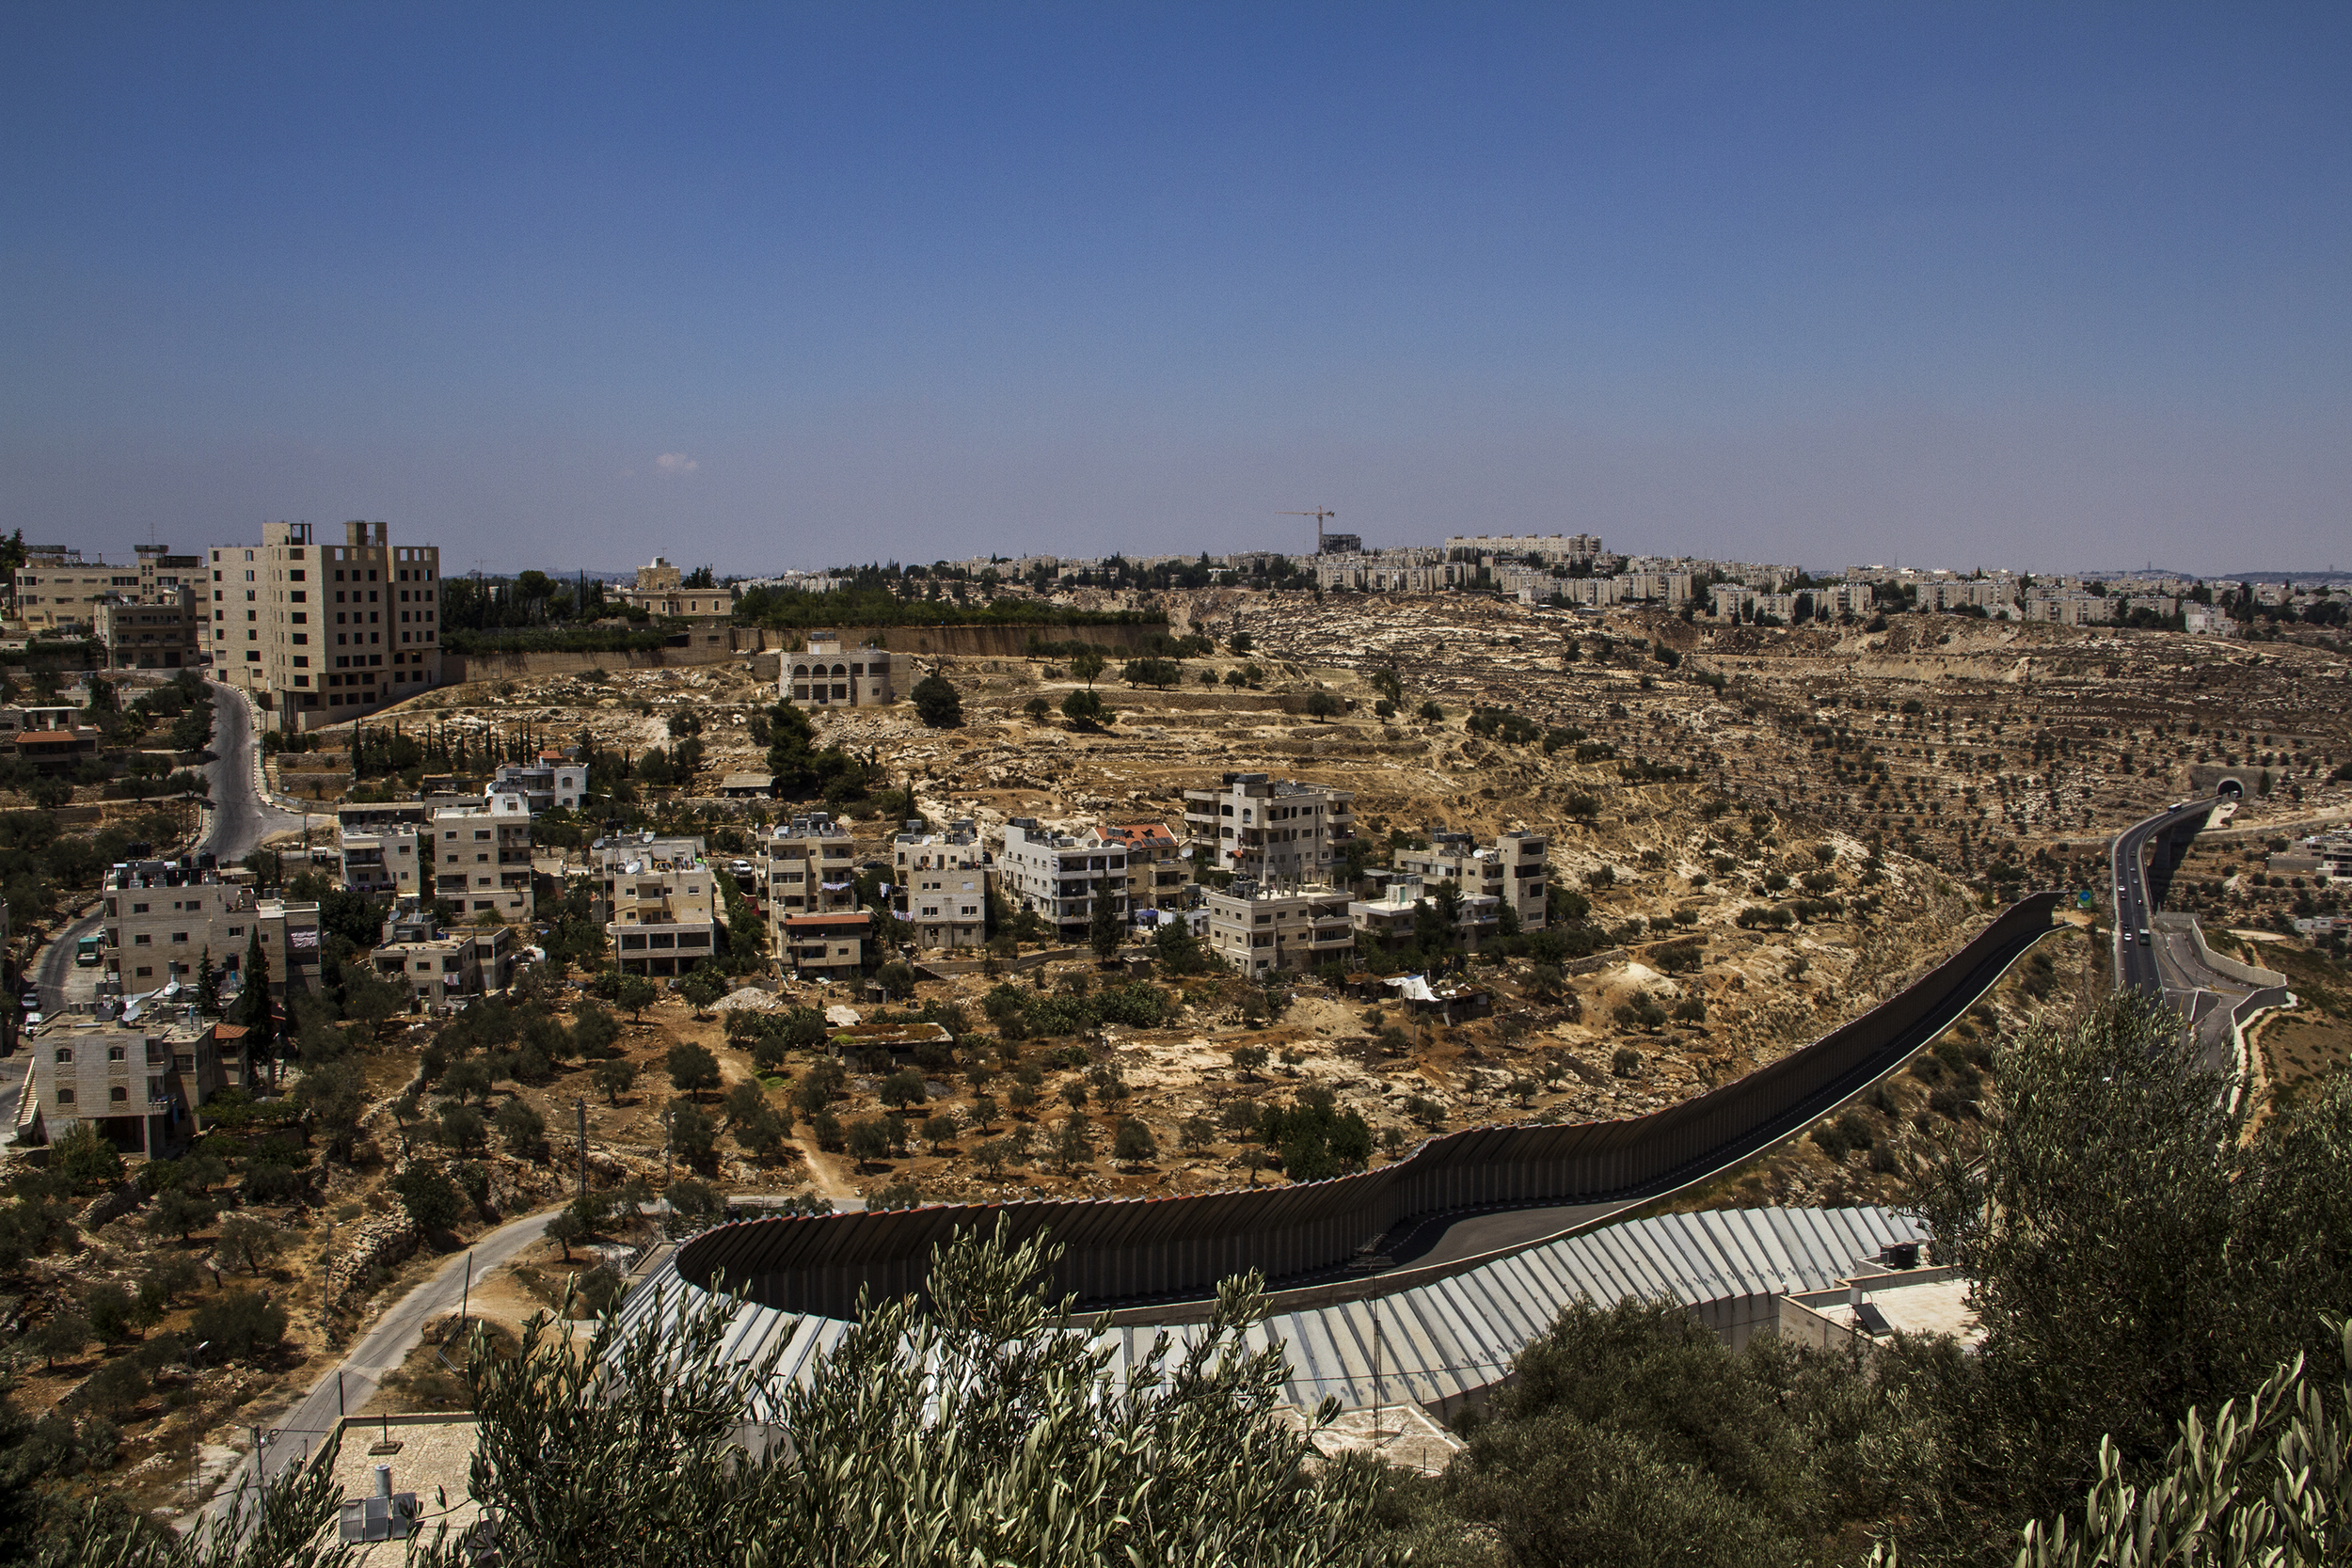 Separation Wall, The West Bank, 2013